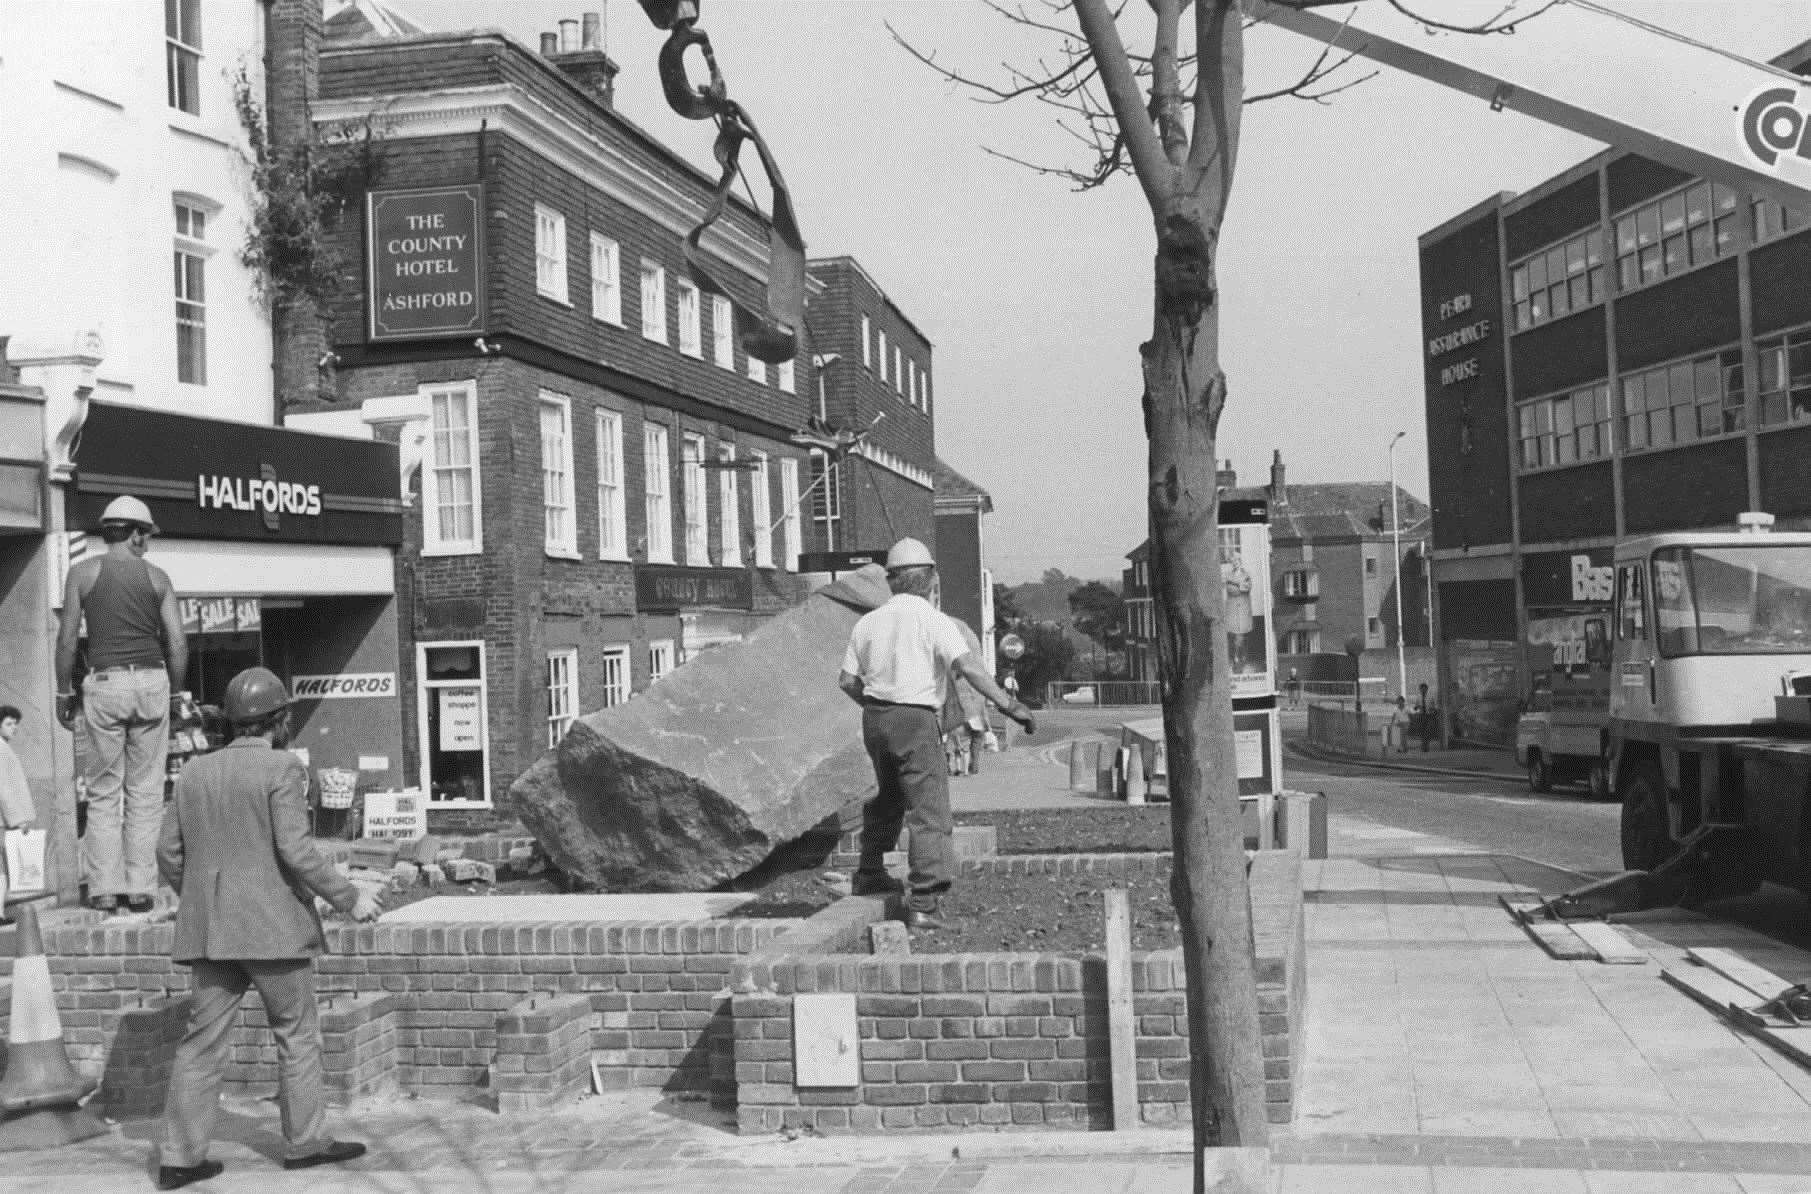 The Friendship Rock is placed in Ashford's Lower High Street in 1983; the rock commemorates the twin links between Ashford and Bad Münstereifel